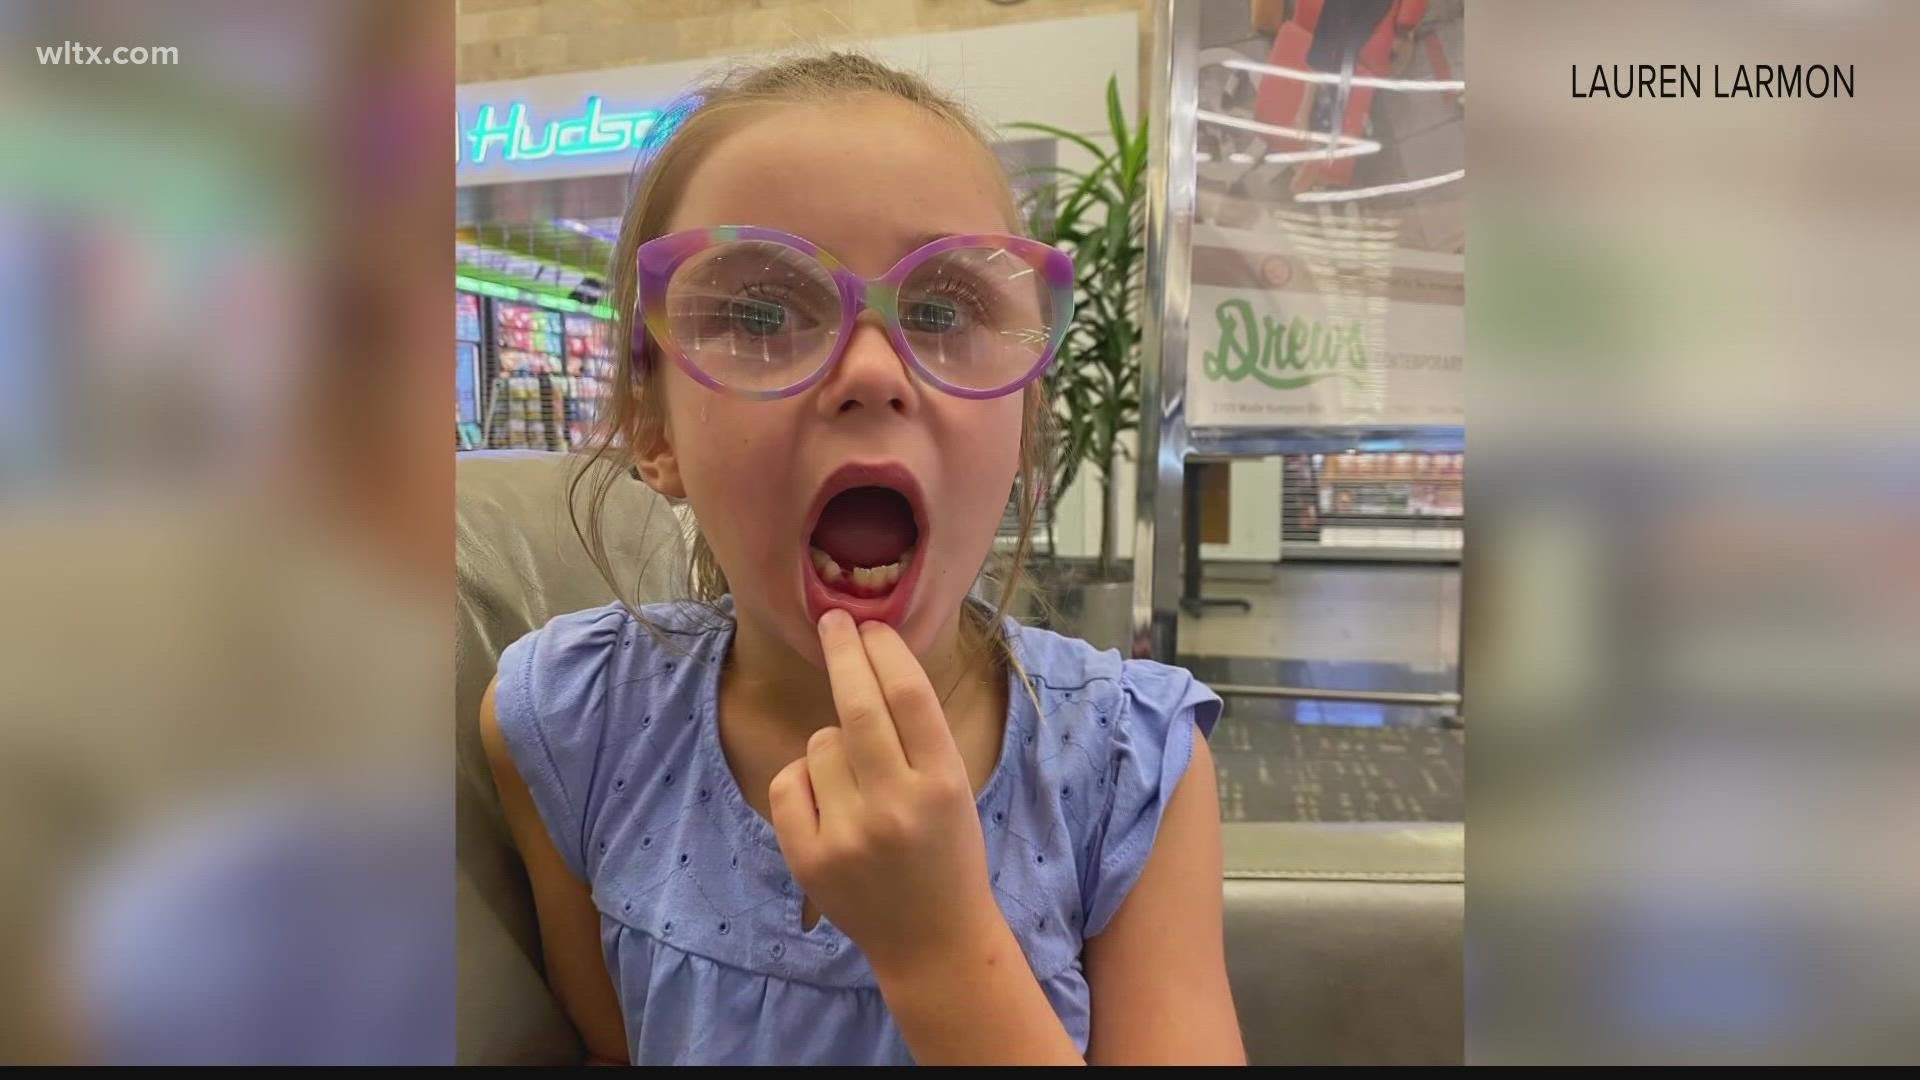 Lena and her family were traveling back through the airport back to Columbia when Lena woke up from her nap on the flight and found that her tooth was missing.